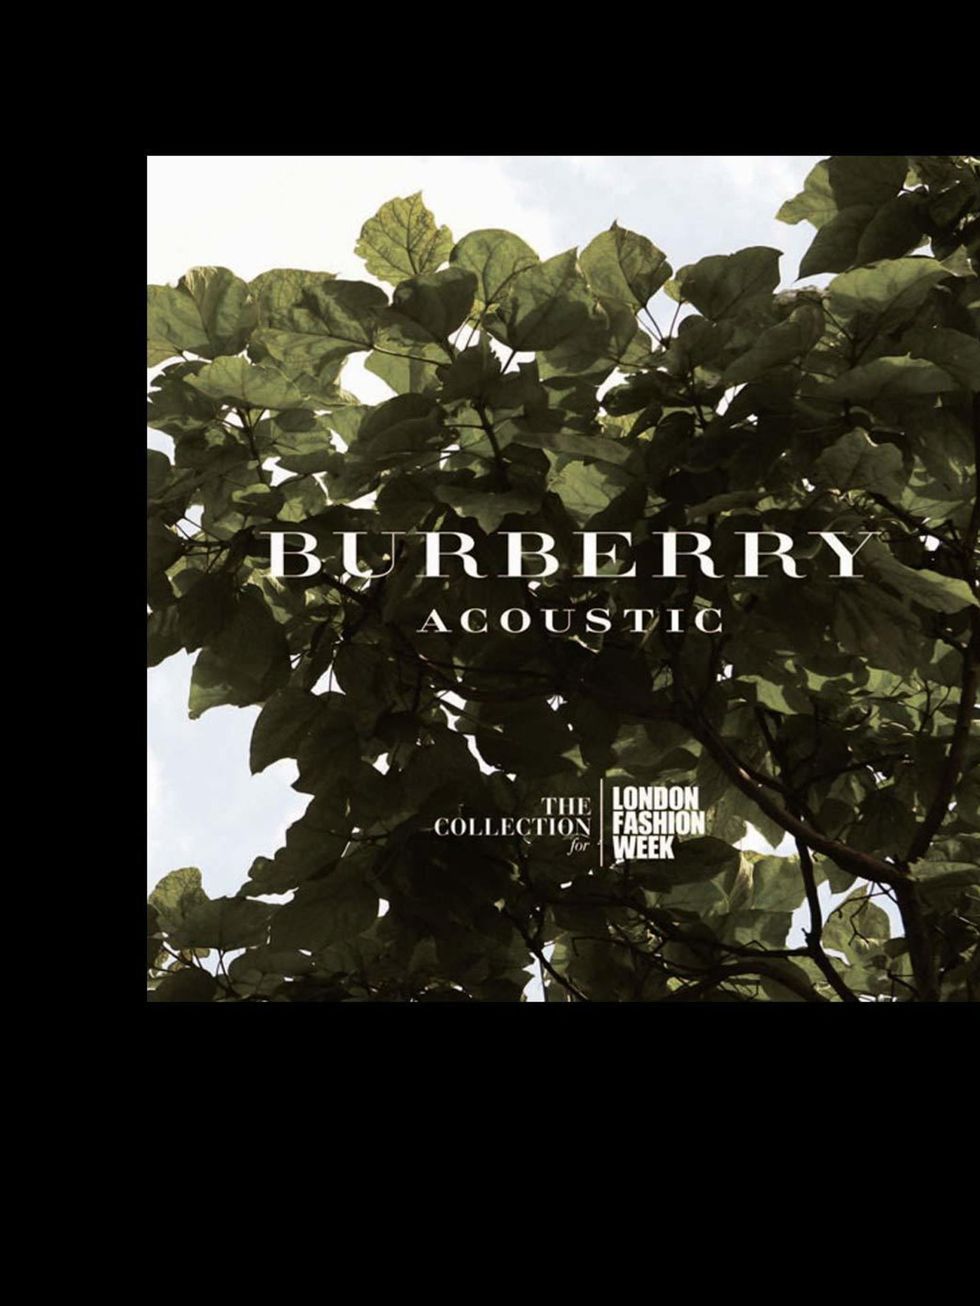 <p><strong>Who?</strong> Burberry Acoustic, an edit of mod-driven melodies from Christopher Bailey &amp; co. that is as satisfactory to the ears as the Burberry trench is to the body</p><p><strong>Where?</strong> twitter.com/Burberry/burberry-acoustic</p>